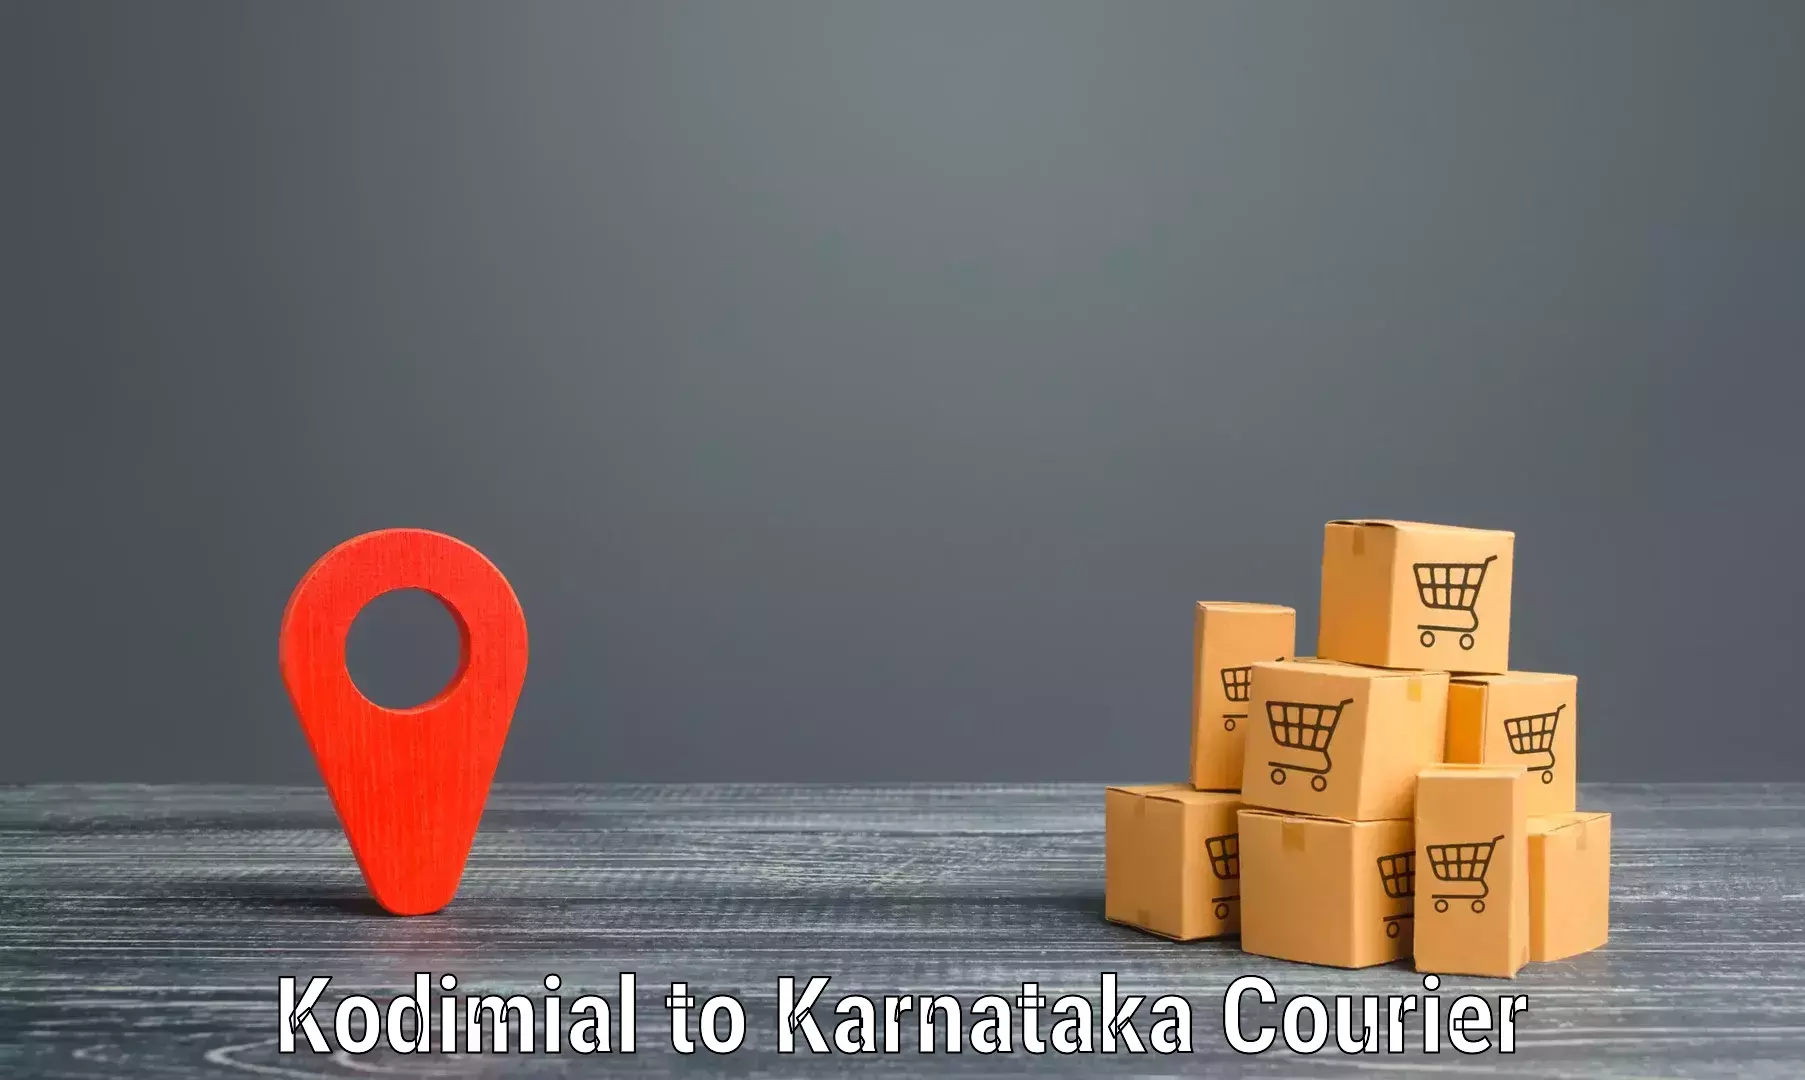 Express delivery capabilities in Kodimial to Gundlupete